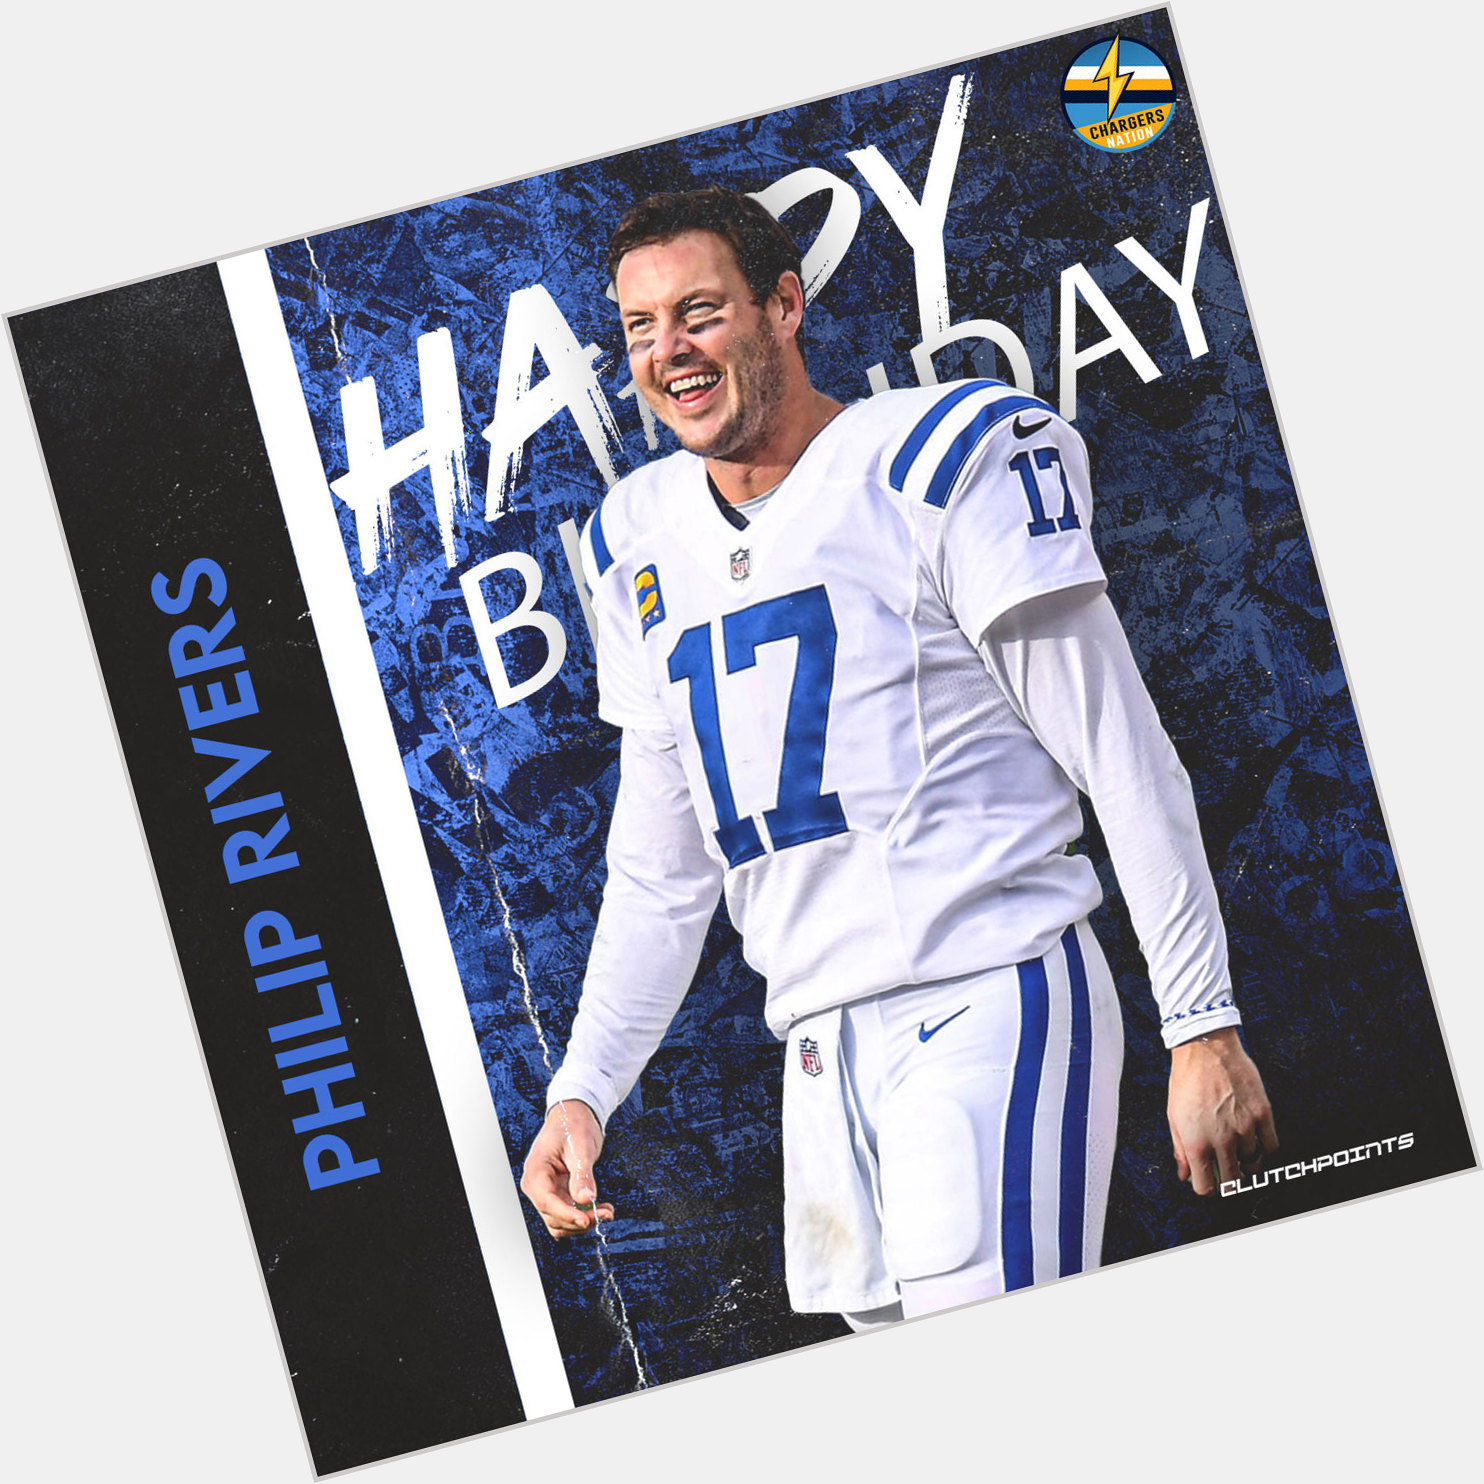 Let\s all wish Philip Rivers a very Happy 40th Birthday  